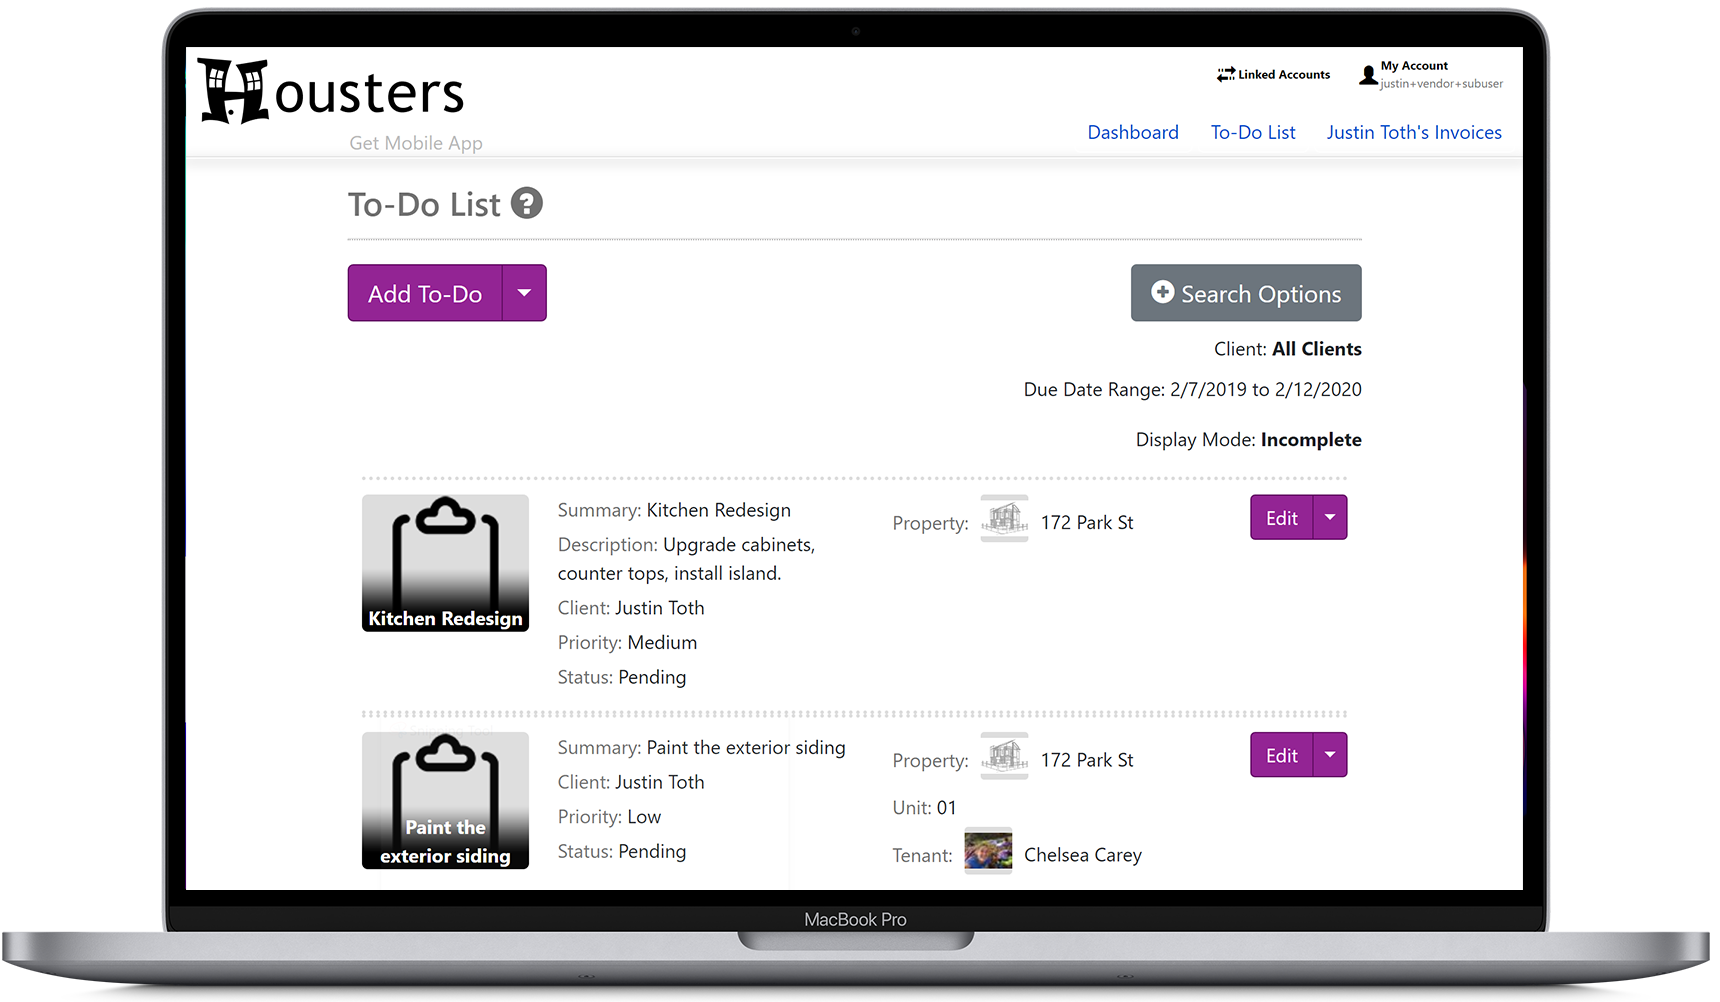 View the to-do list that is shared between you and your landlord and property manager clients on the contractor portal